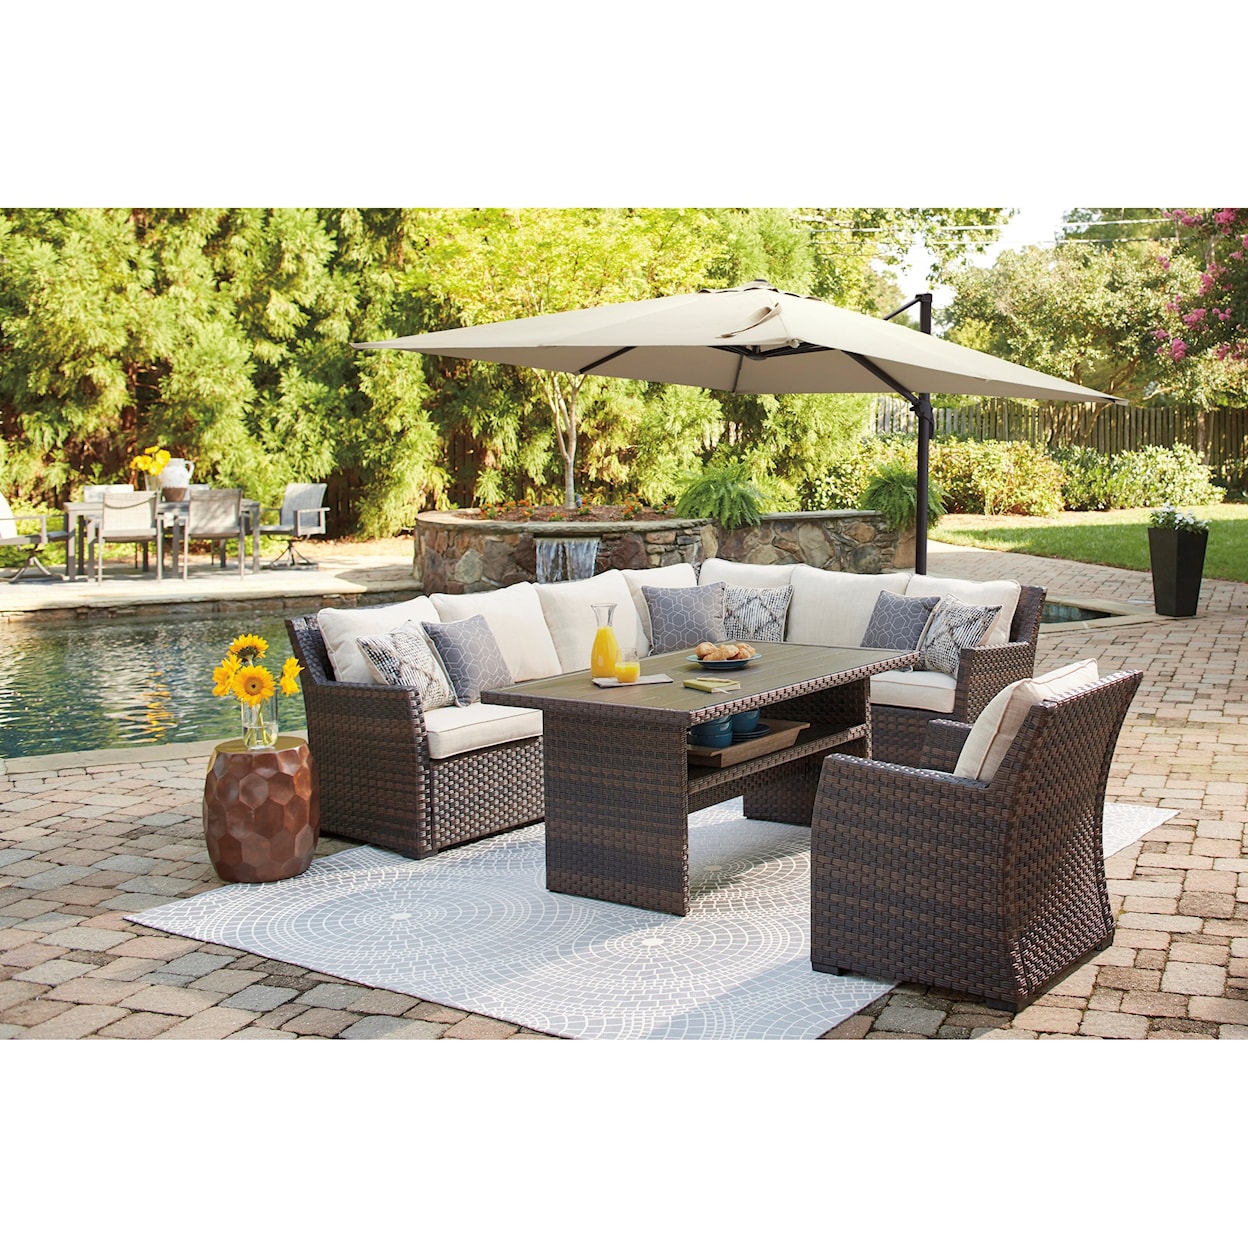 Signature Design by Ashley Easy Isle Outdoor 2-Piece Sectional & Lounge Chair Set